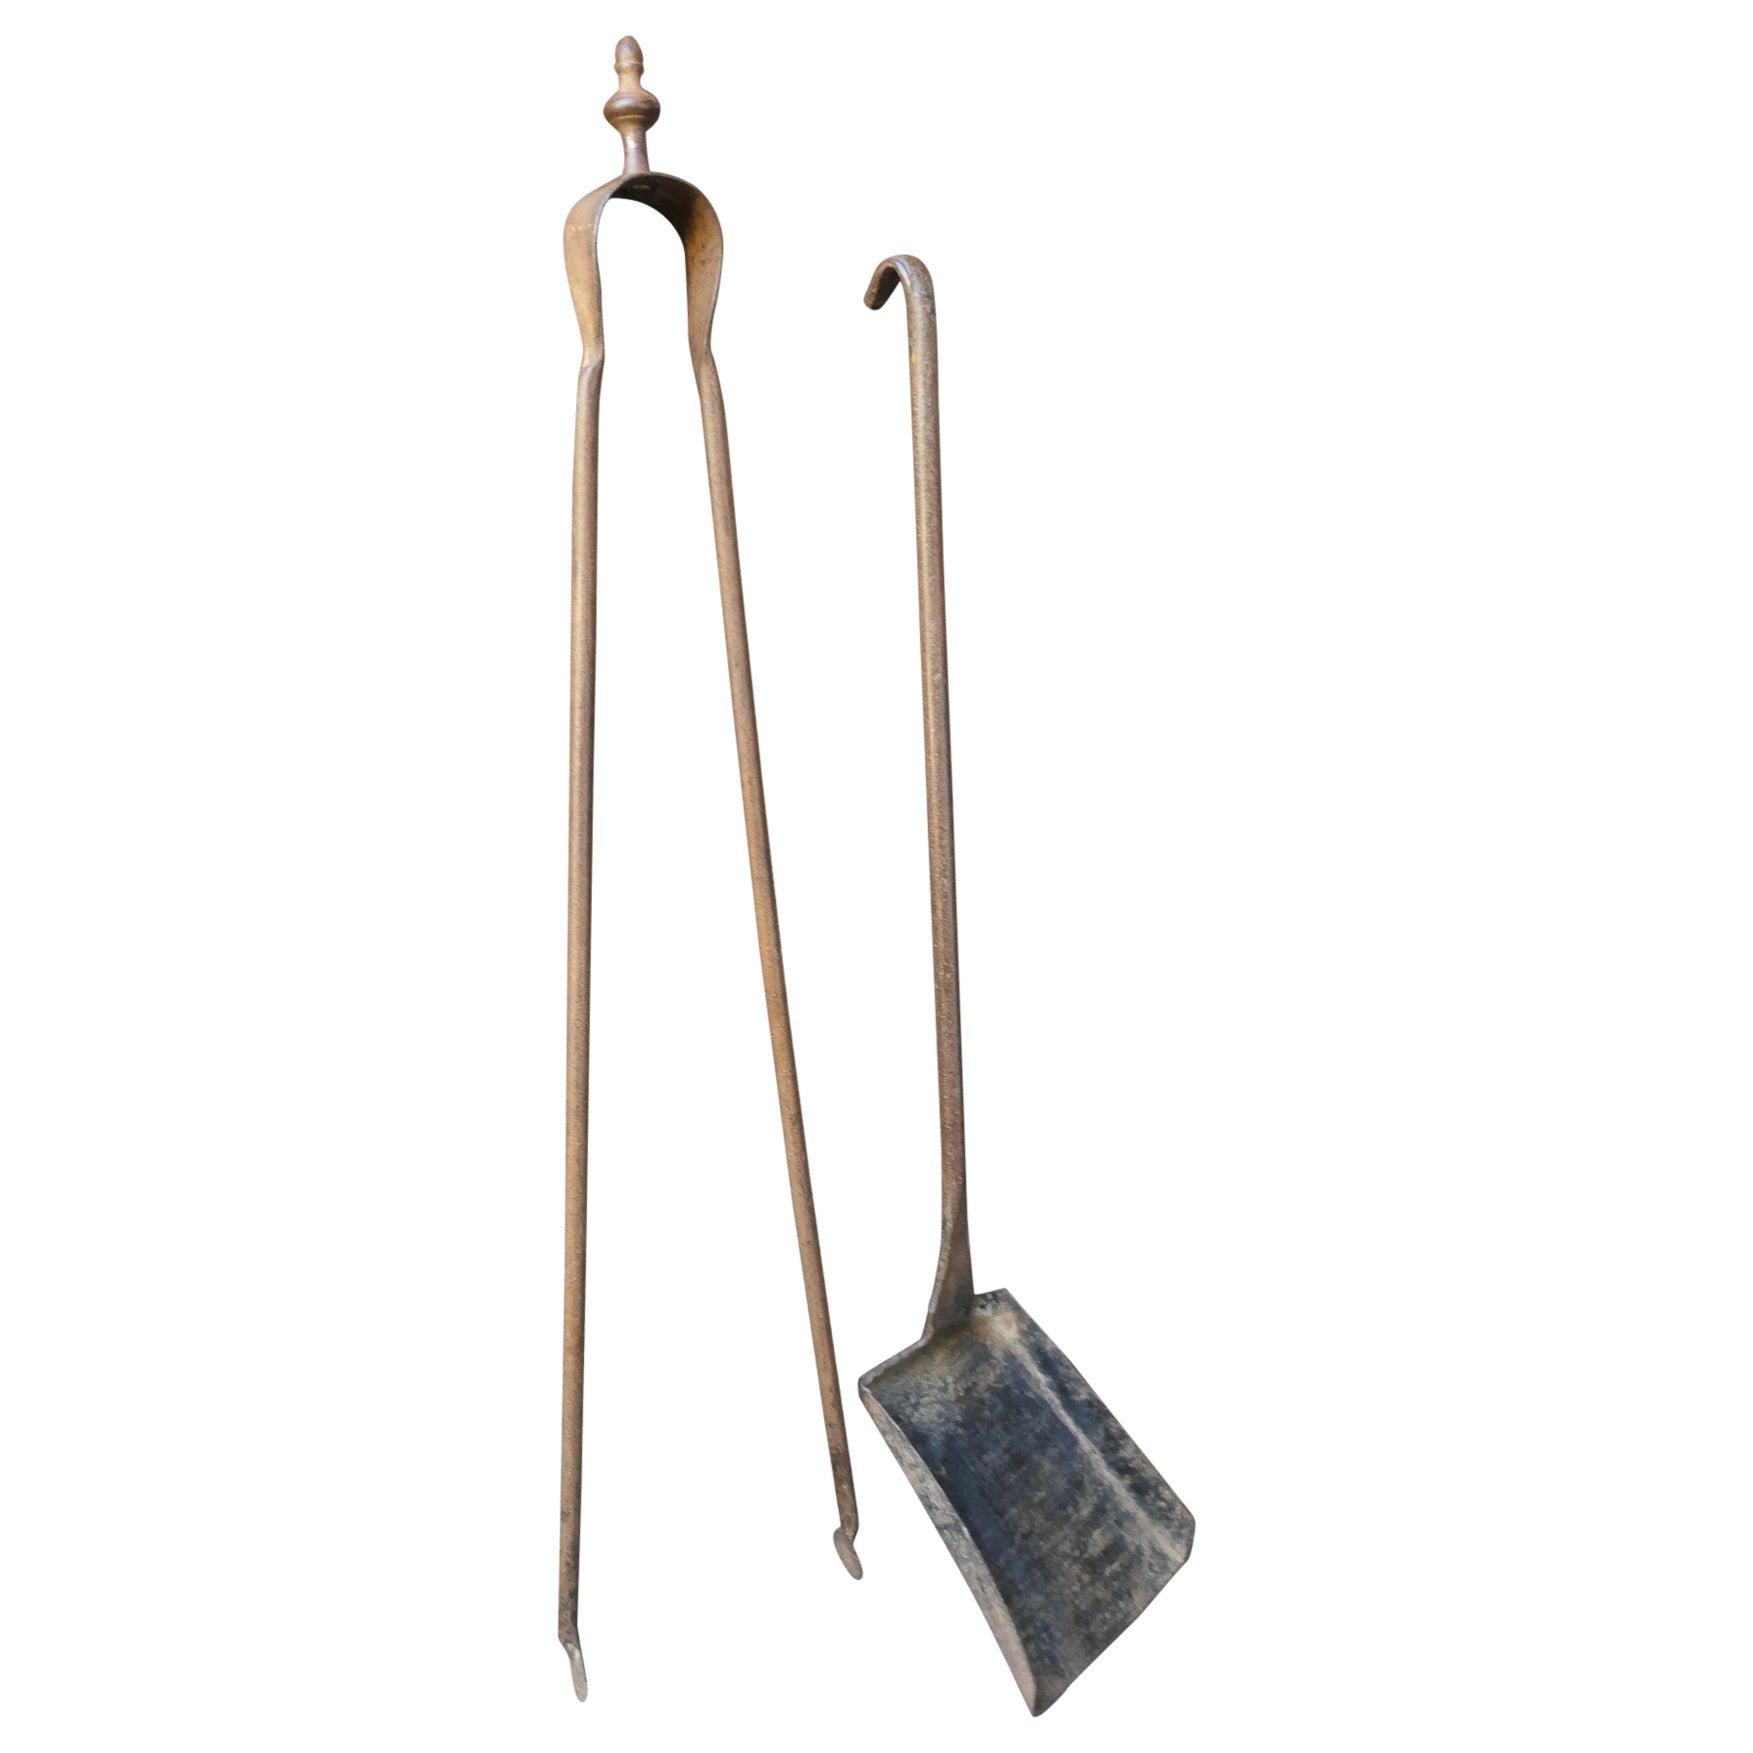 Rustic French Neoclassical Fireplace Tools, 18th-19th Century